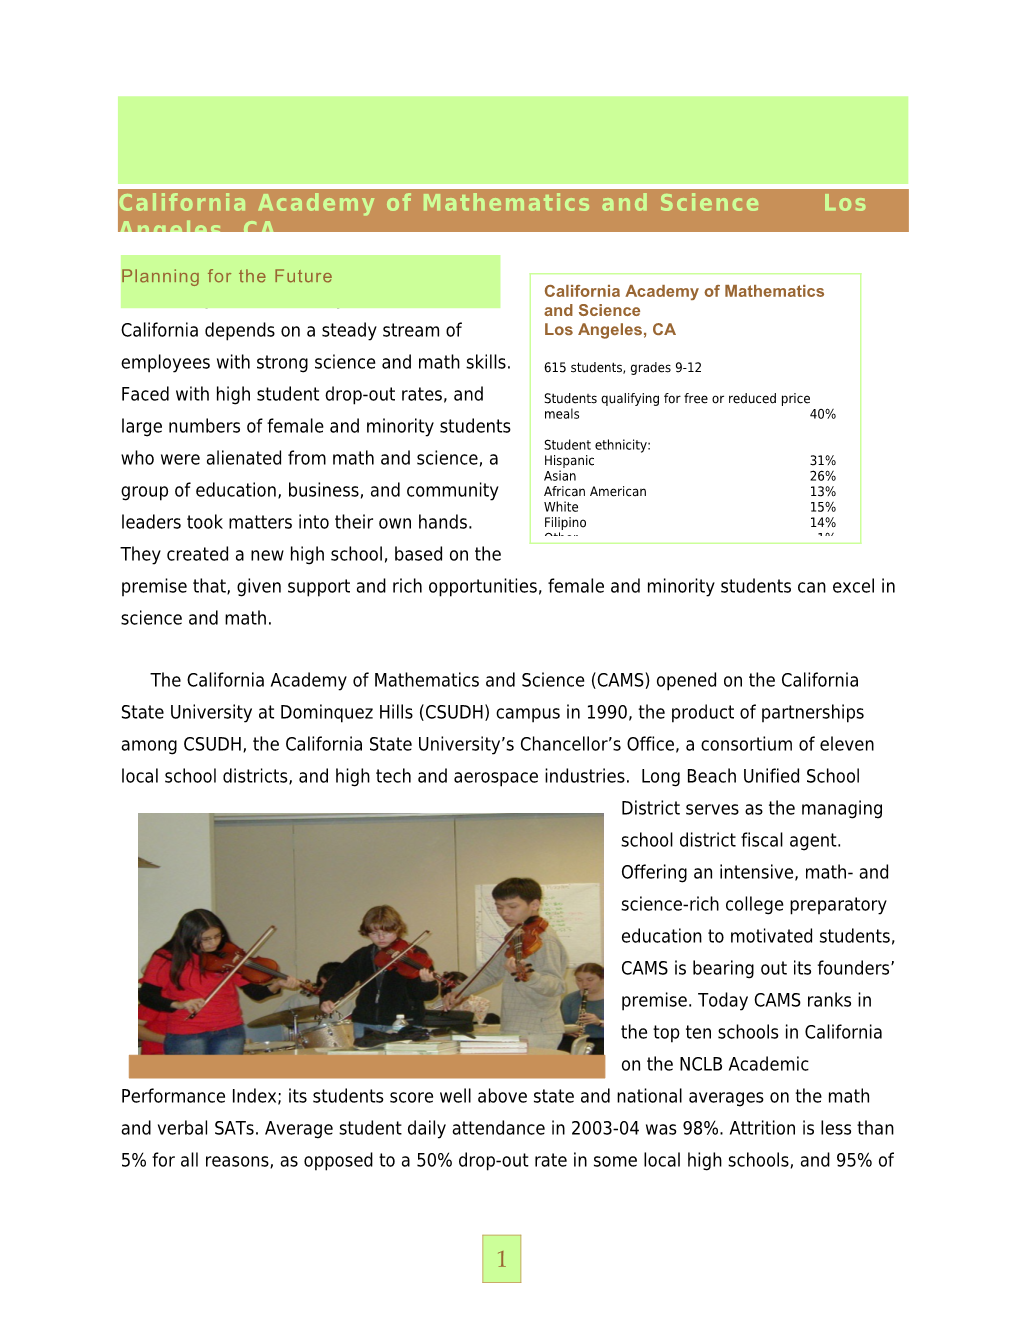 California Academy of Mathematics and Science, Los Angeles, CA Learning from Six High Poverty